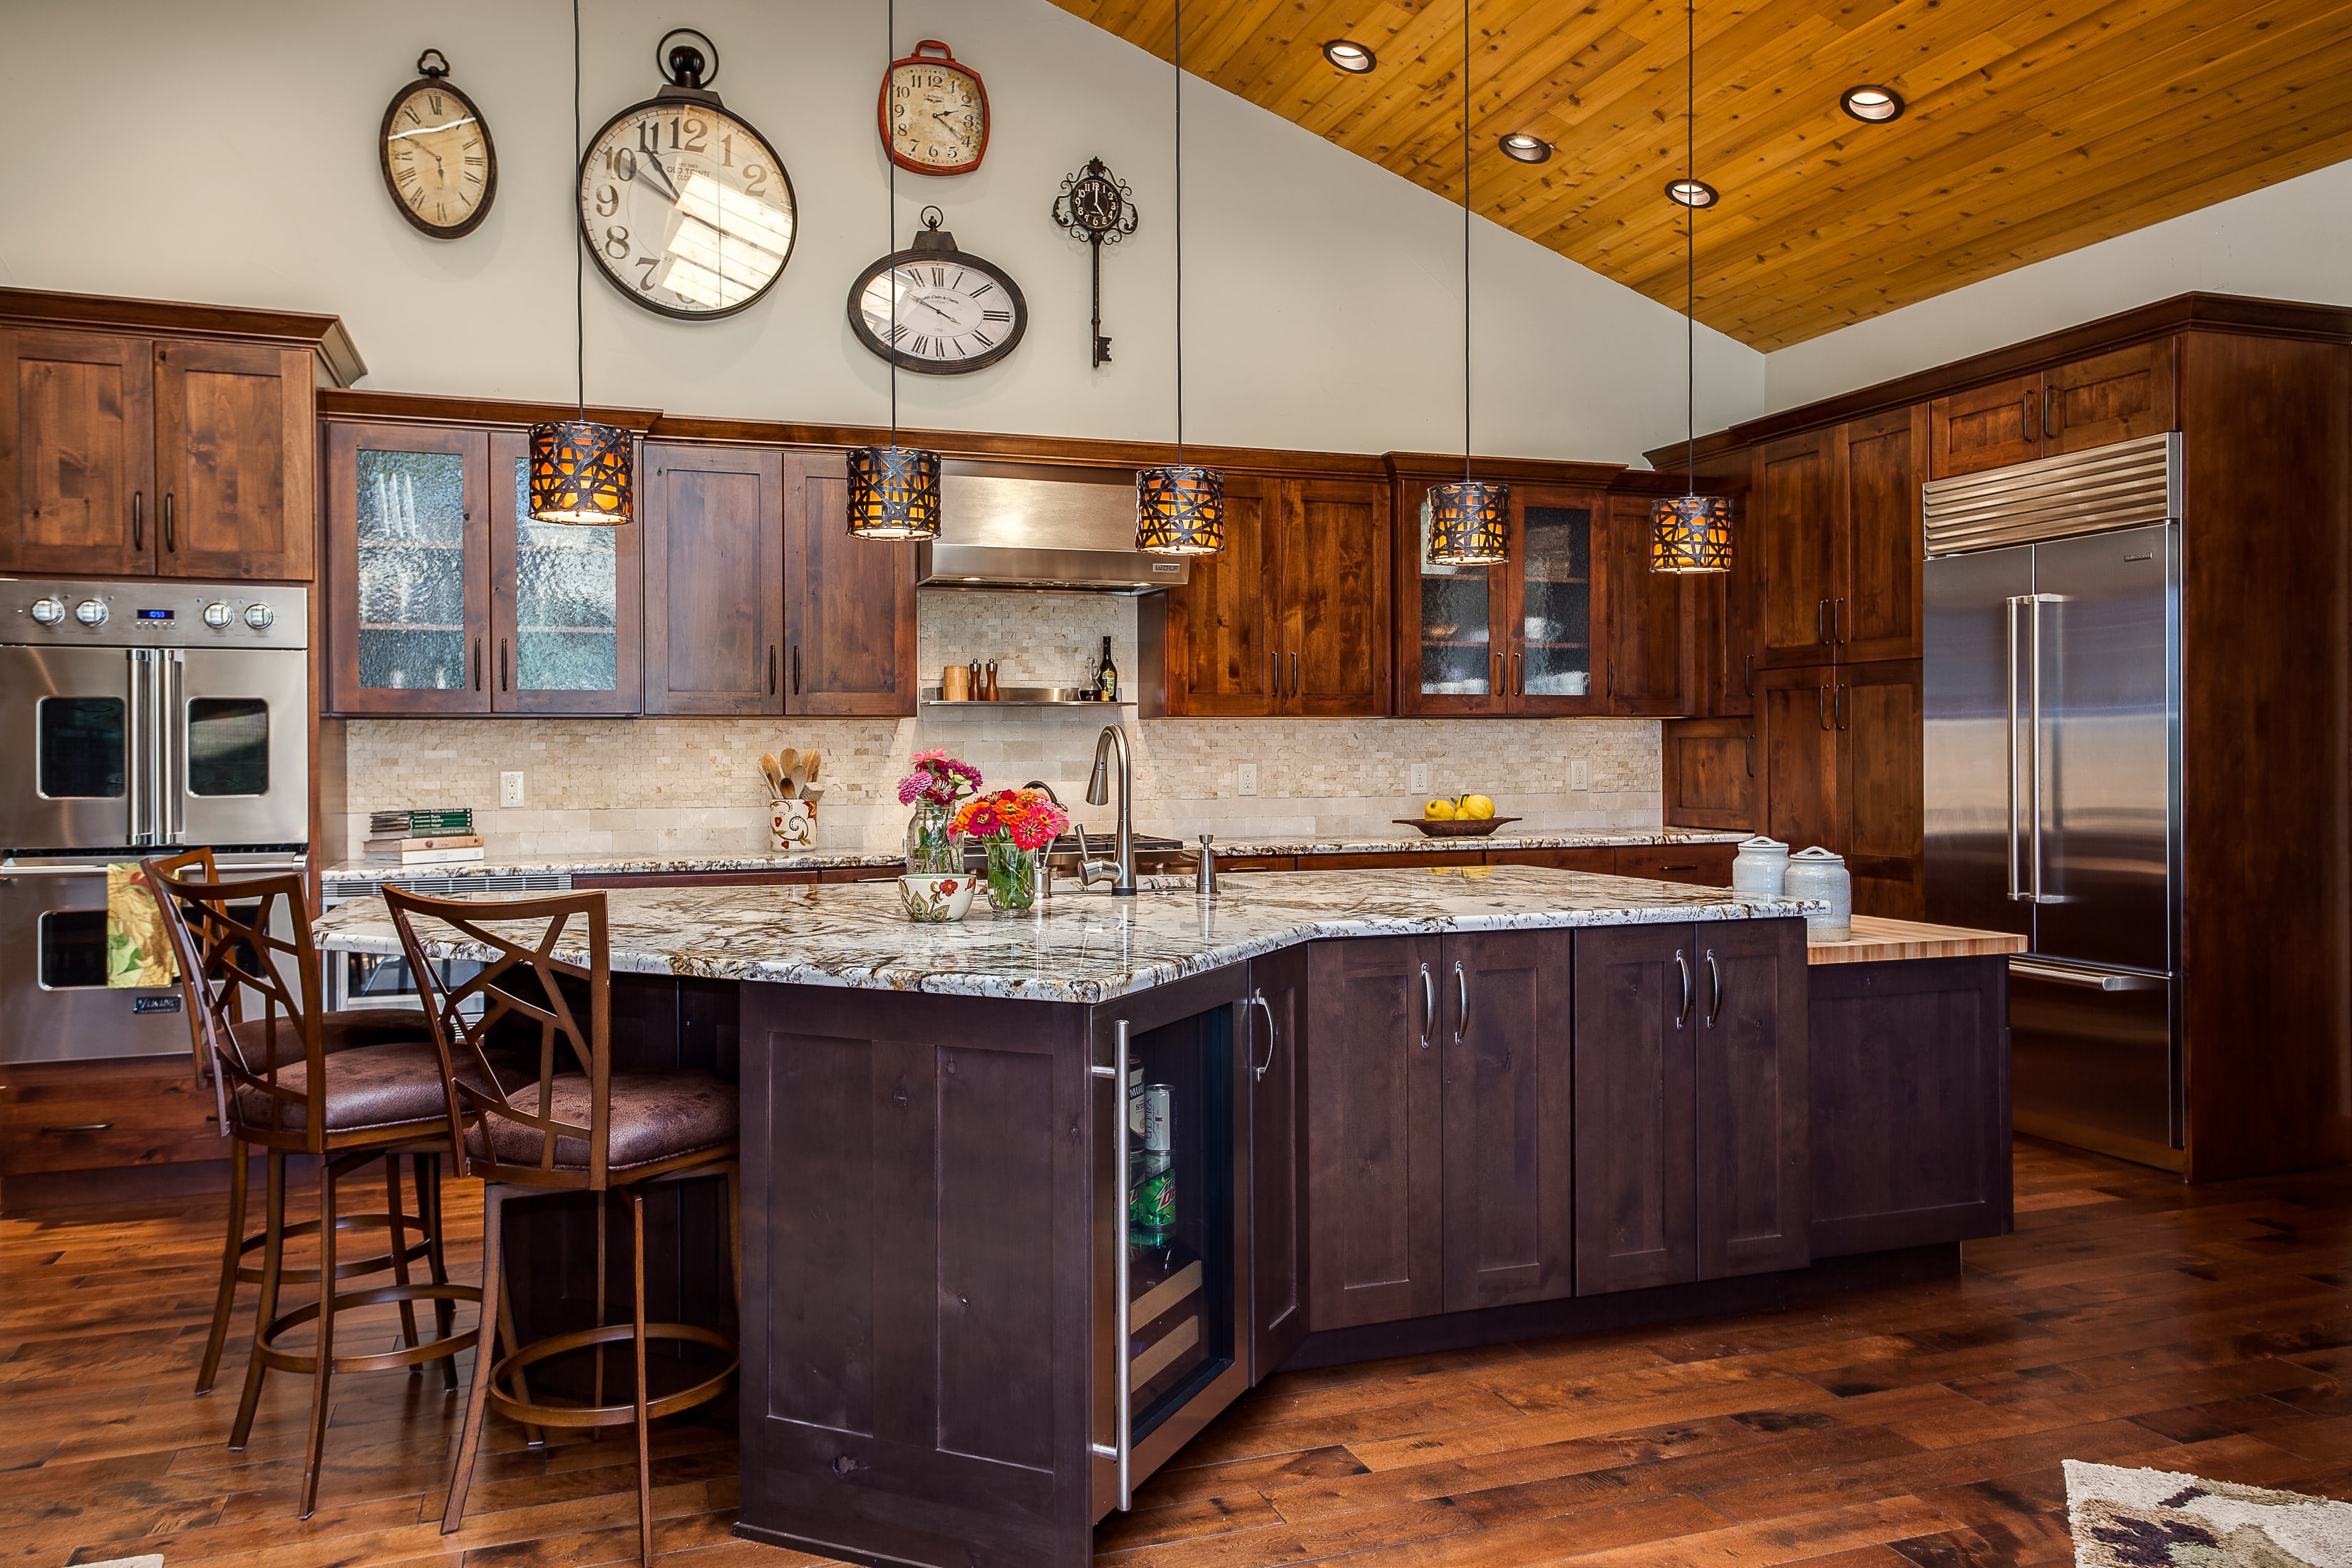 rustic wood kitchen cabinets